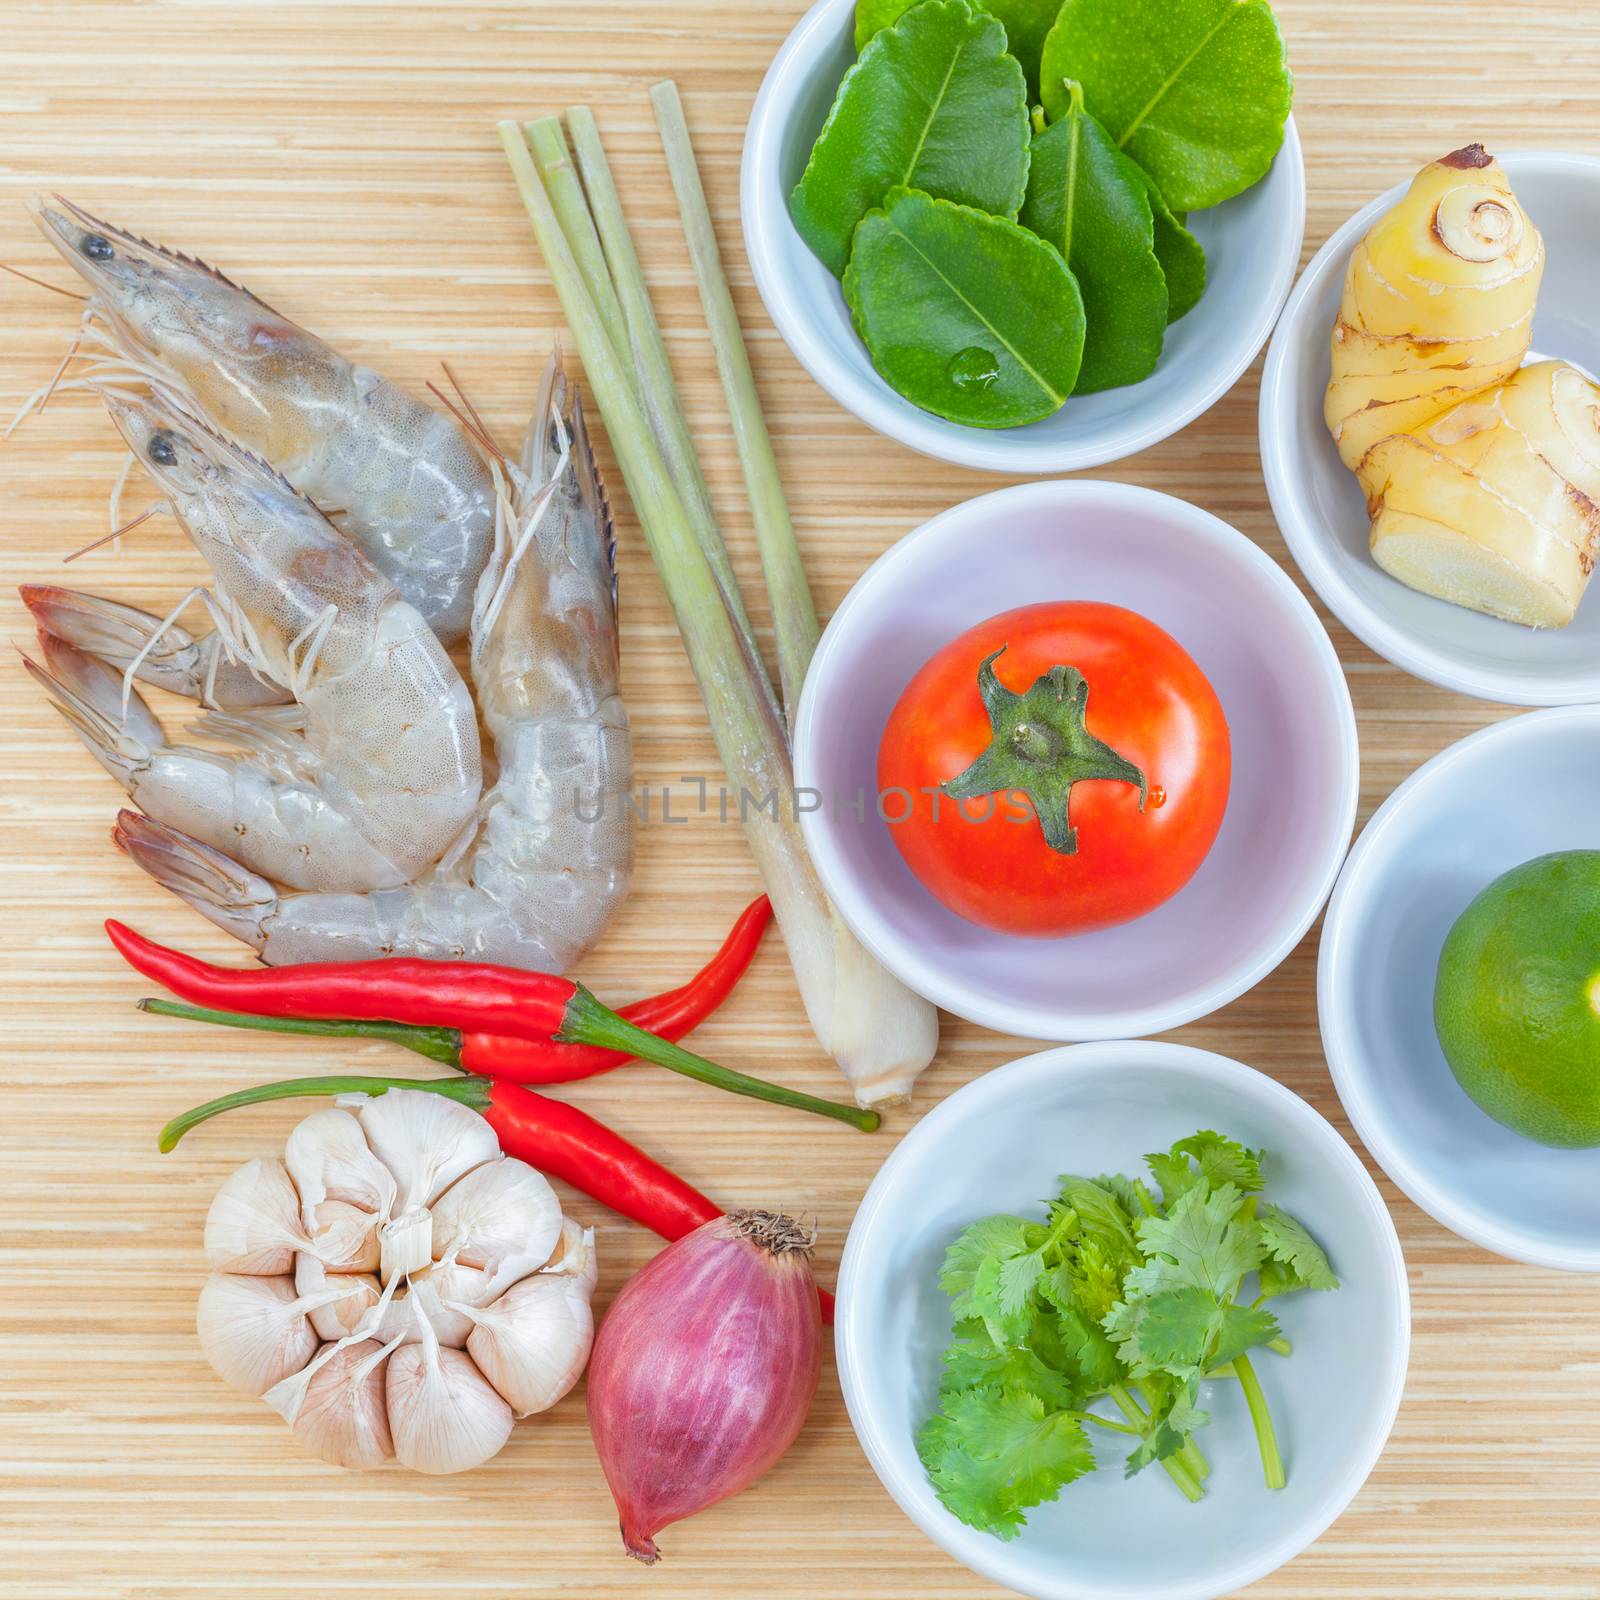 Ingredients of thai spicy soup Tom Yam Kung , big shrimp ,lime, lemon grass and tomato for favourite spicy thai cuisine food with herbs on wooden background.